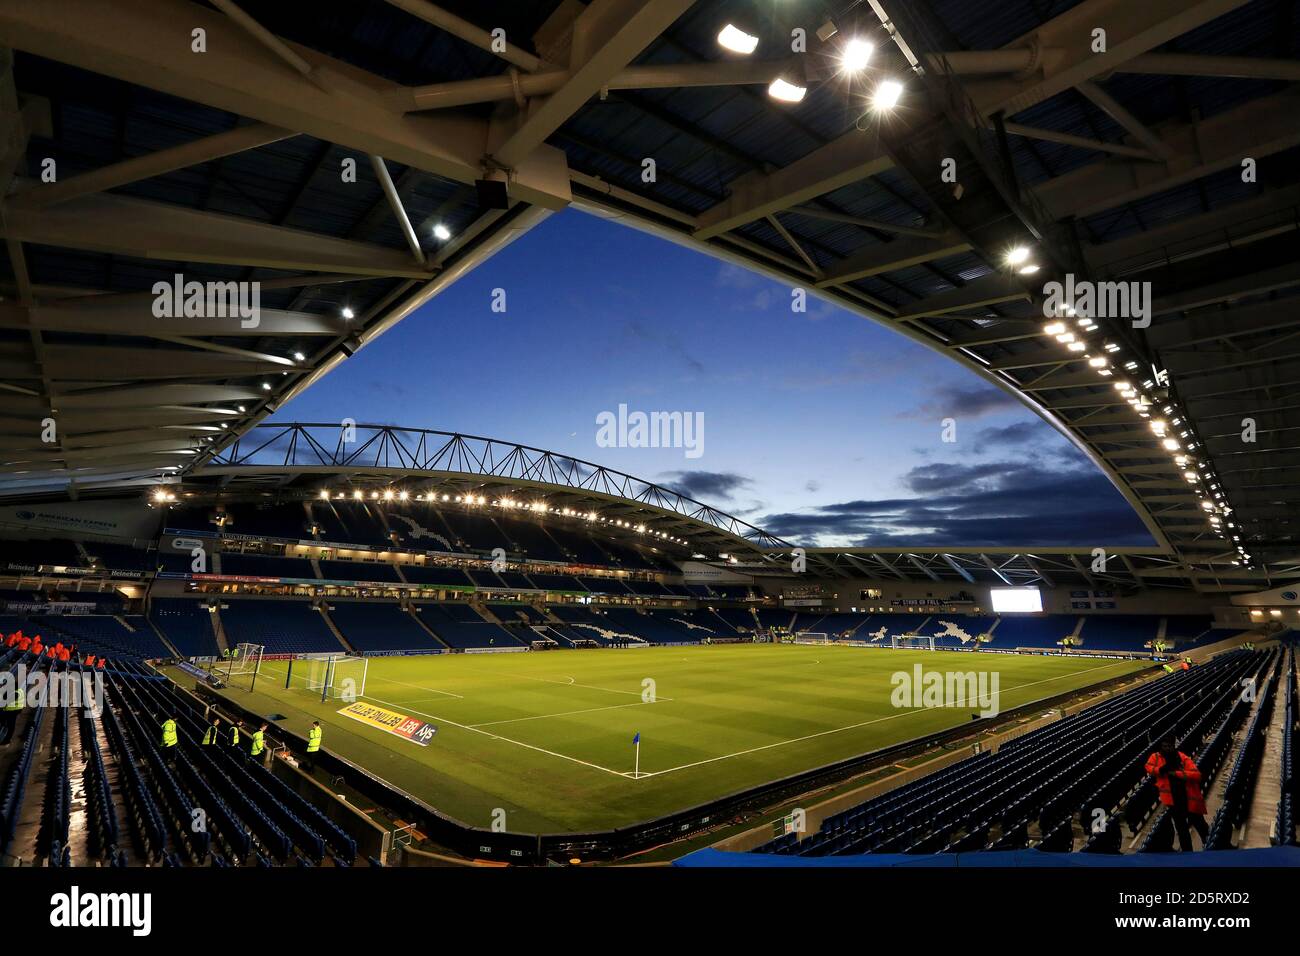 A view of an empty AMEX Stadium before the game Stock Photo